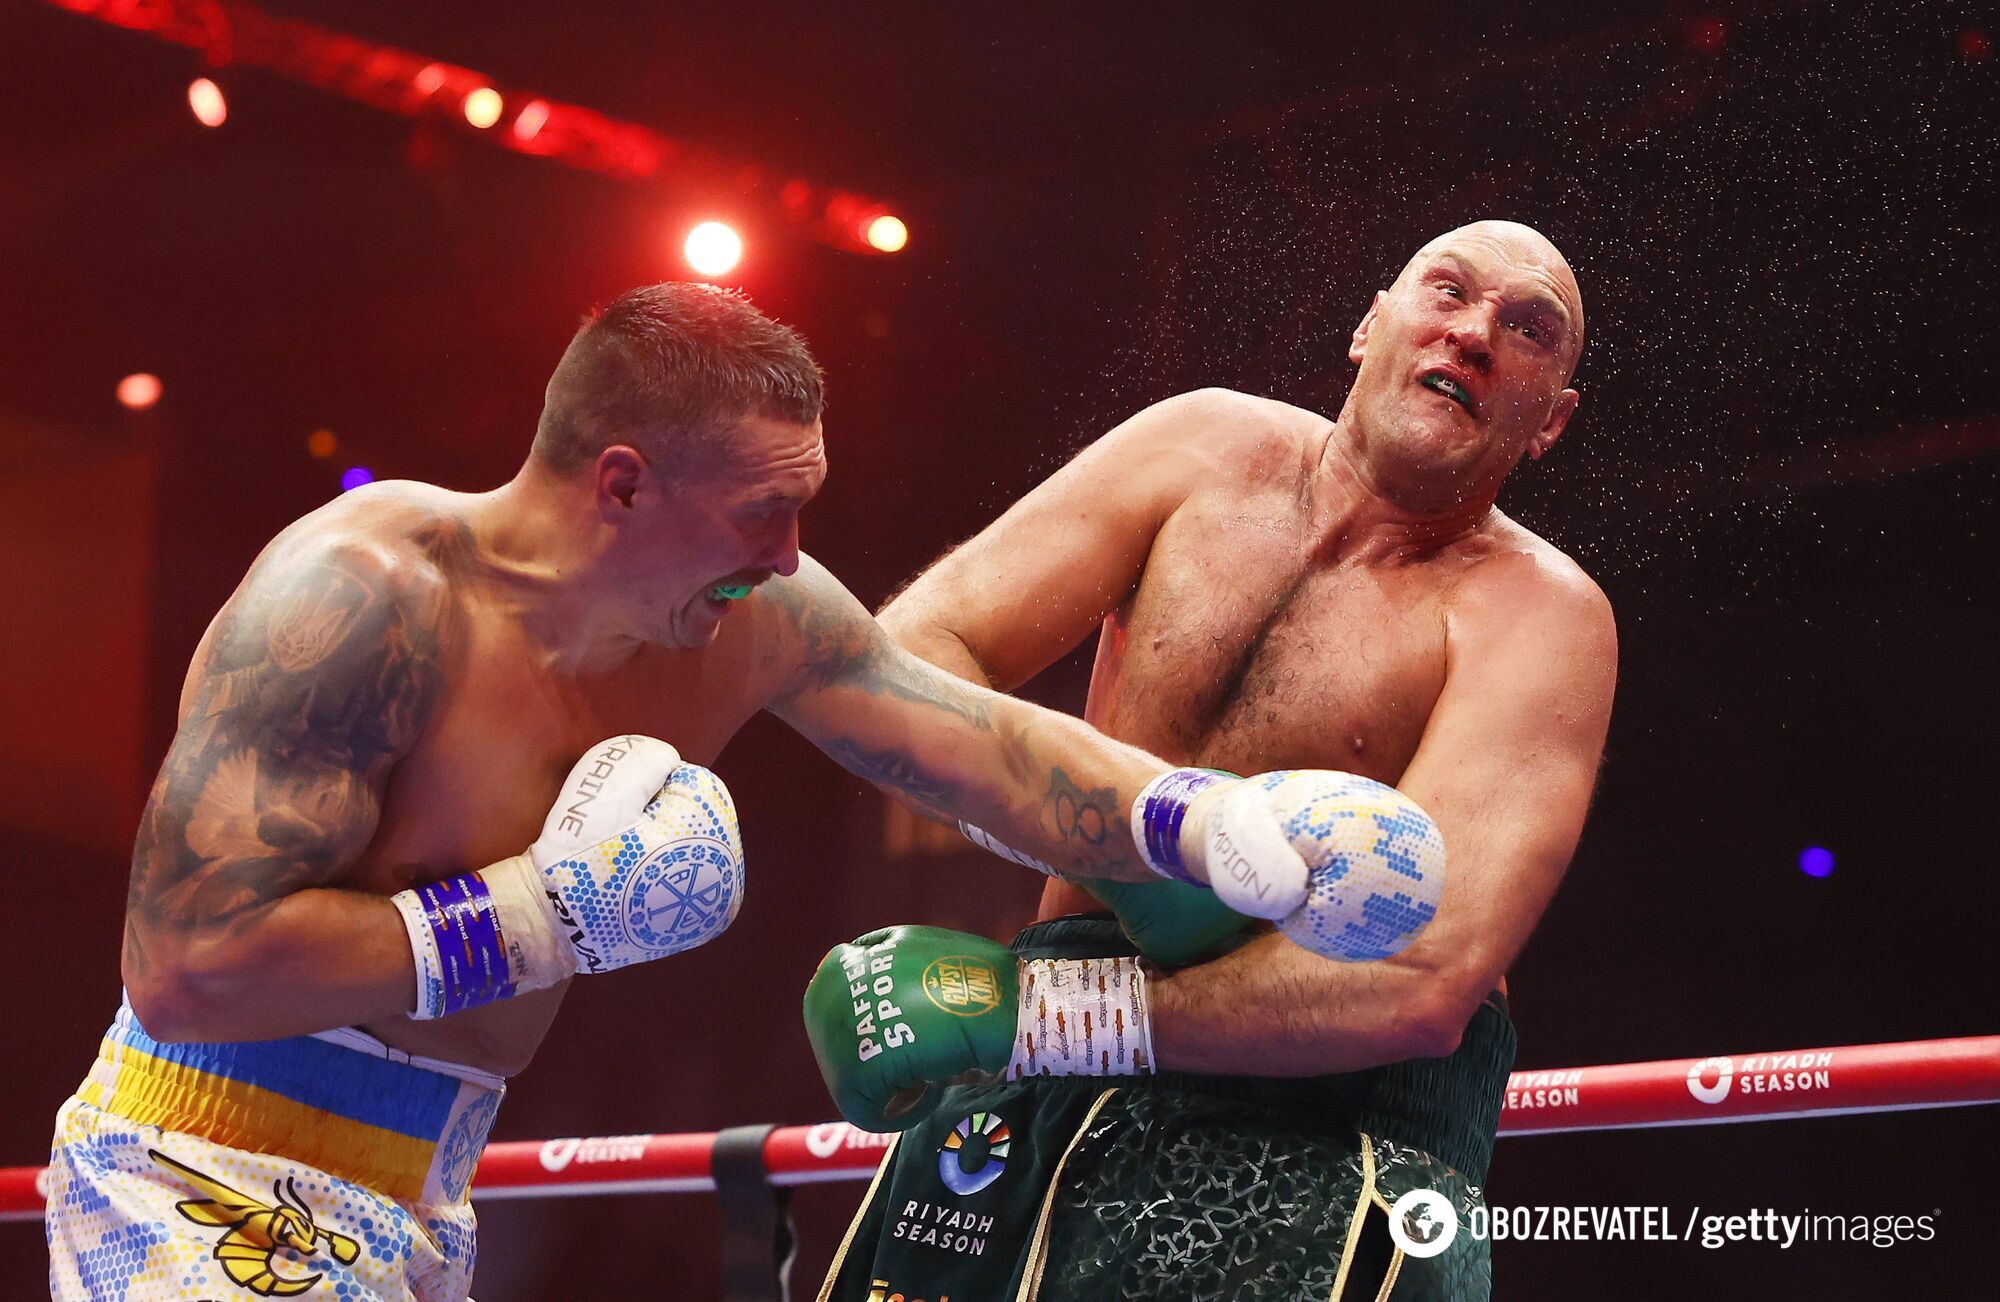 ''It can be organized'': Russian ex-champion says there is a conspiracy around the Usyk – Fury rematch